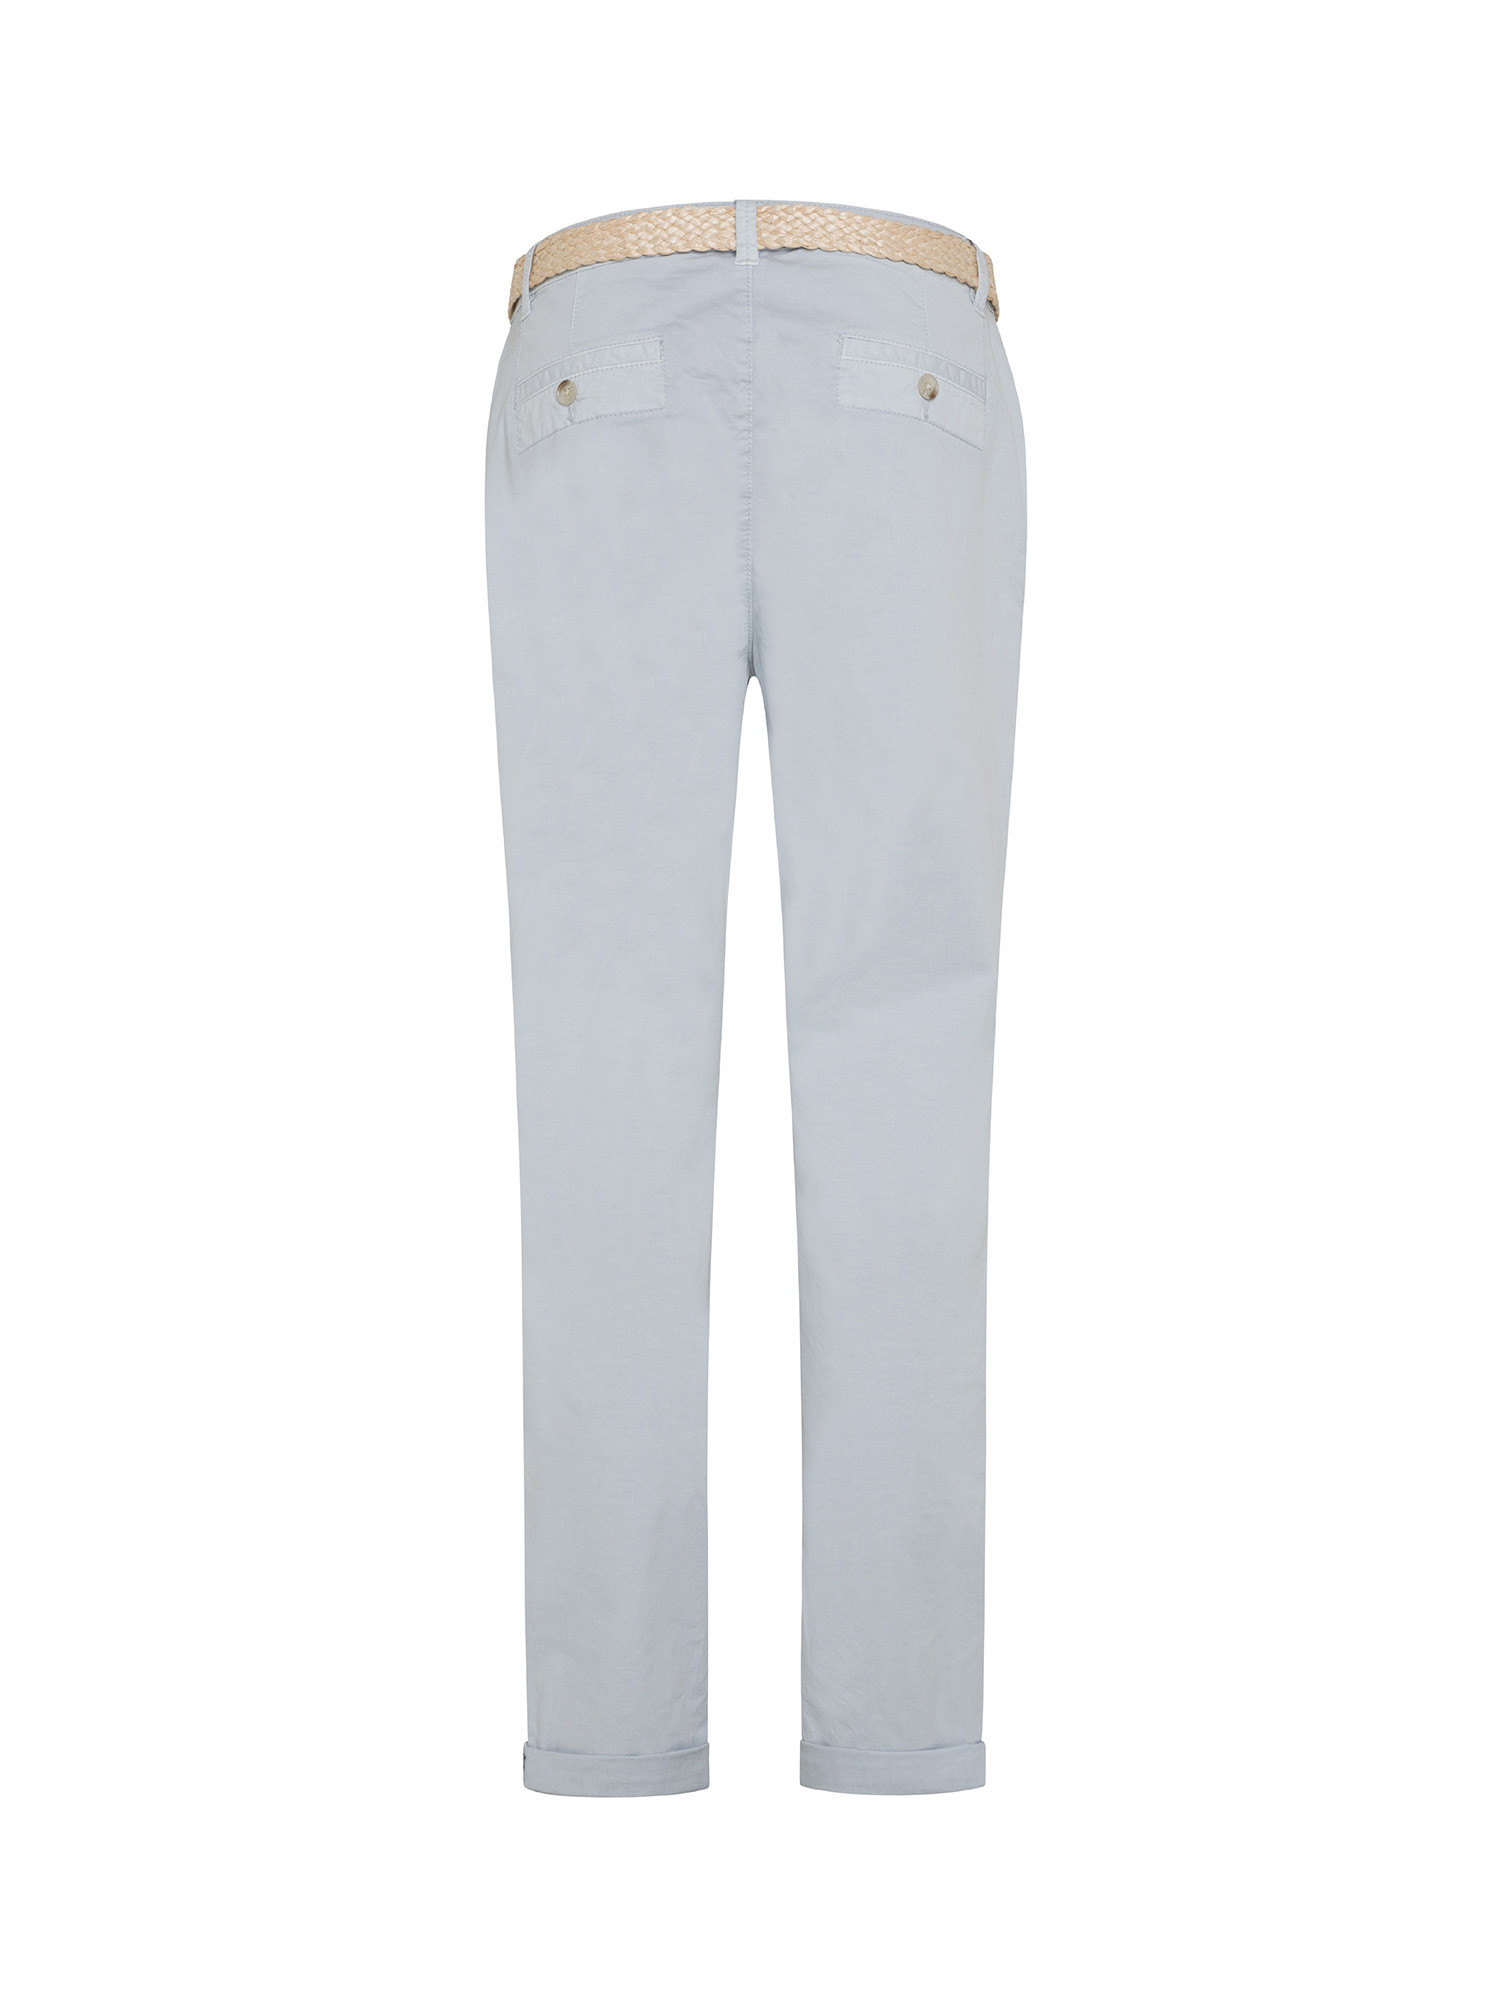 Esprit - Cropped chinos with belt, Light Blue, large image number 1